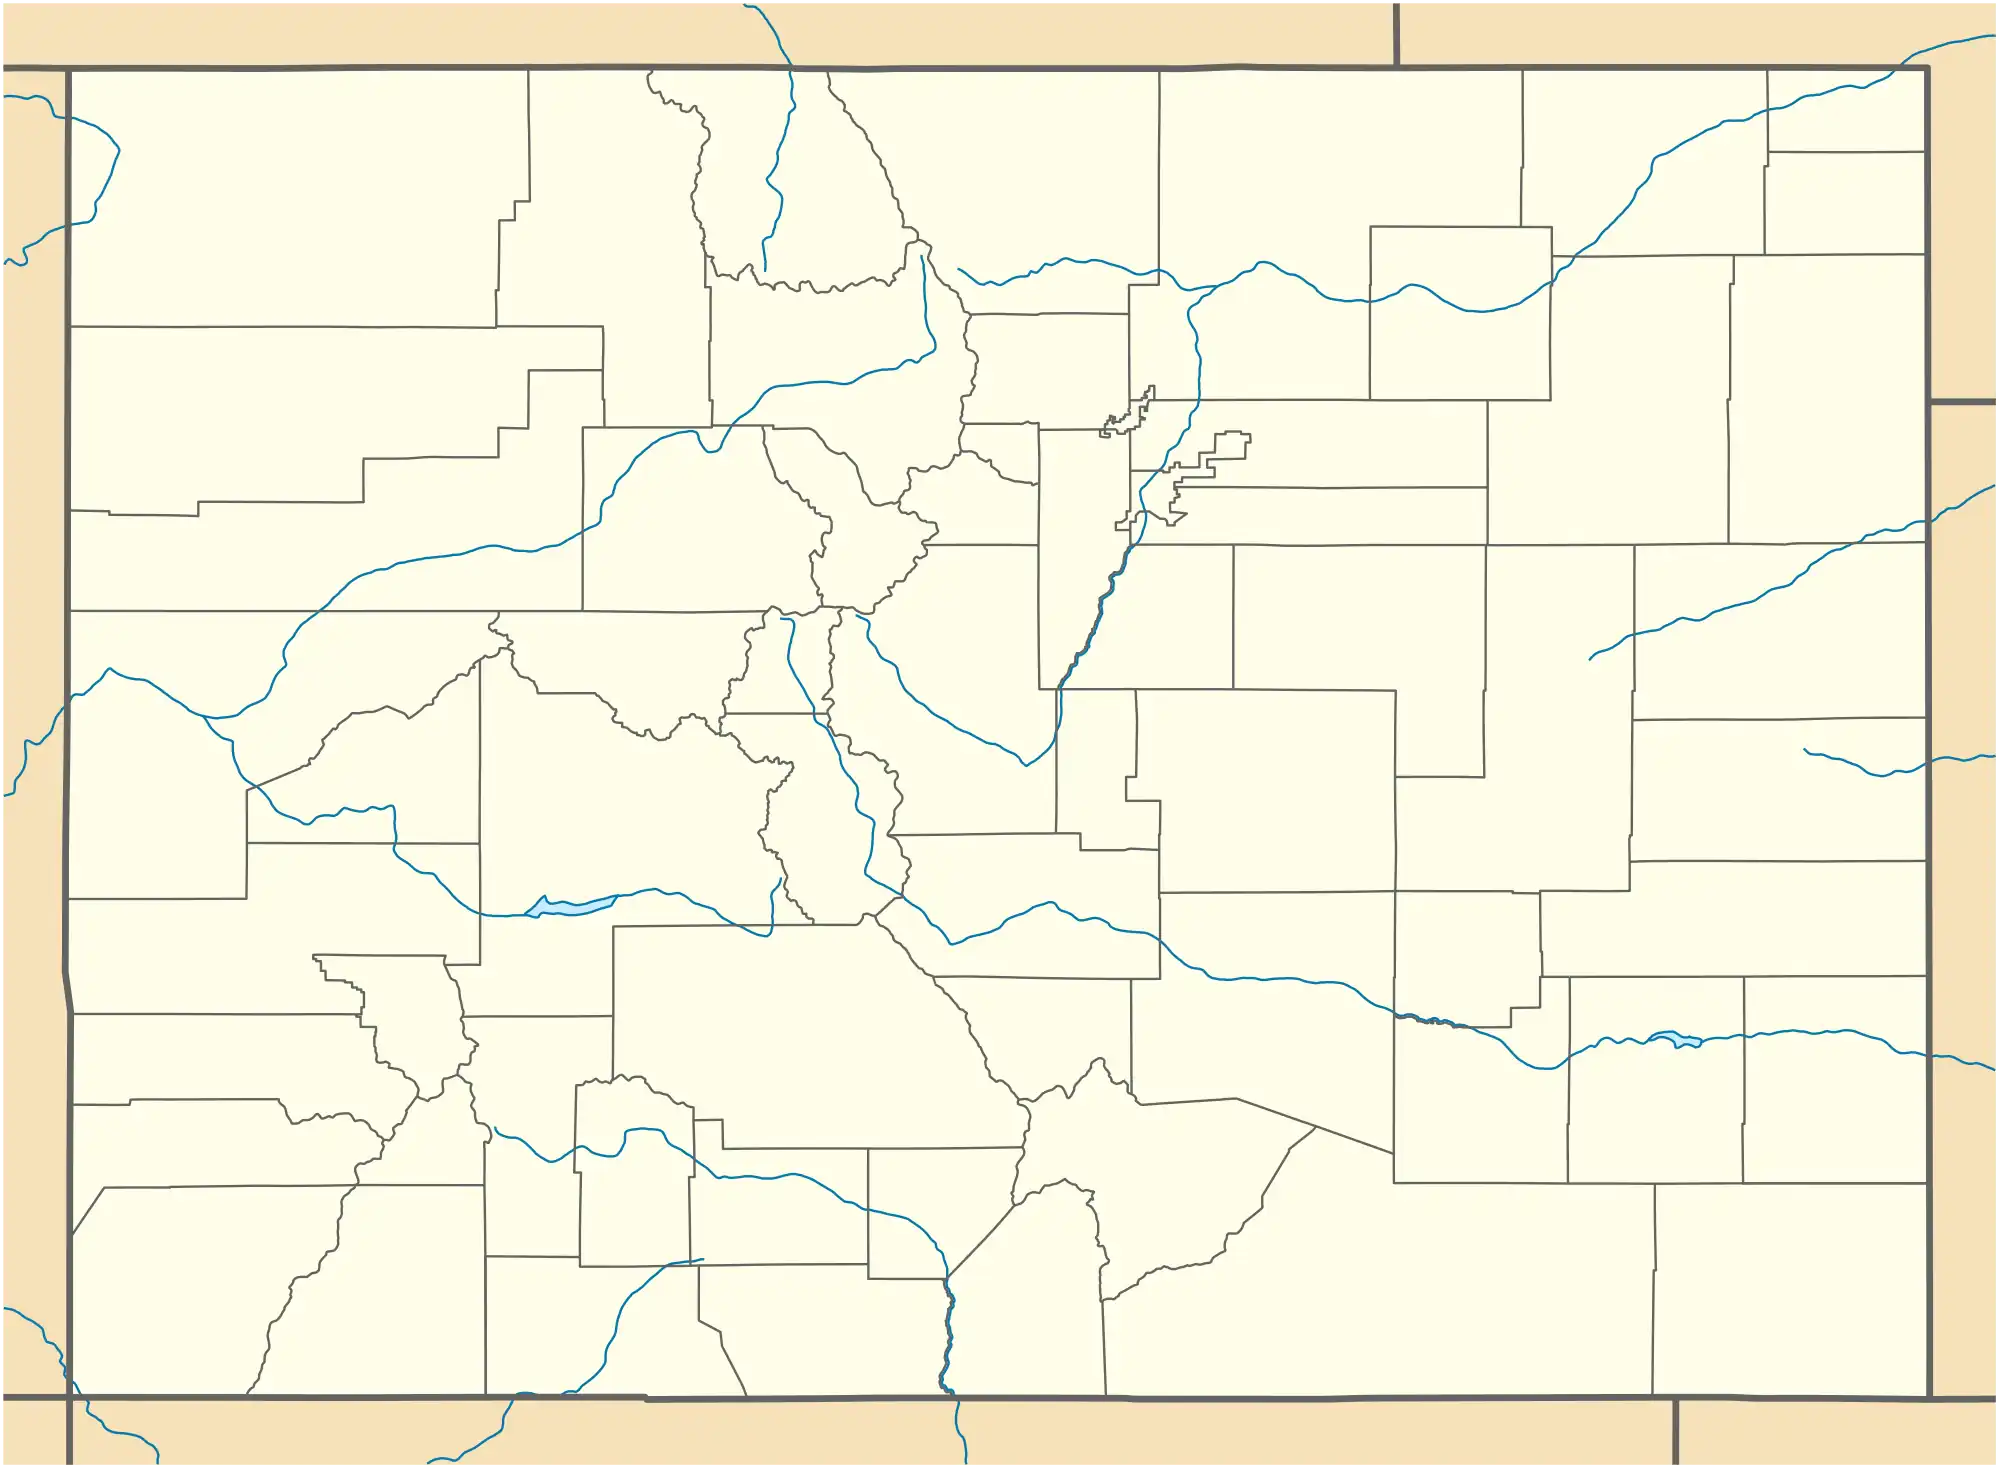 Capitol City is located in Colorado